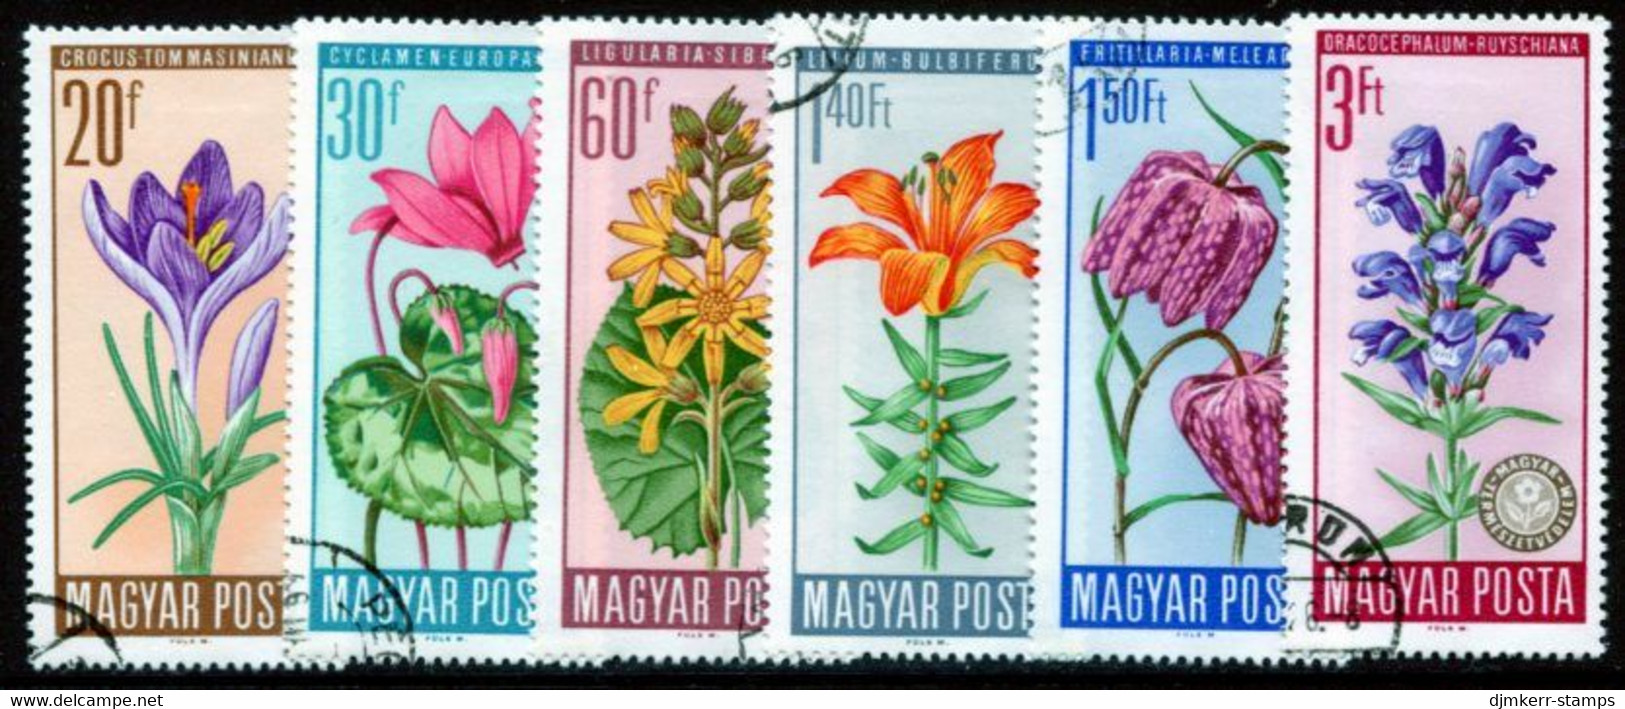 HUNGARY 1966 Protected Flowers Used.  Michel 2212-17 - Used Stamps